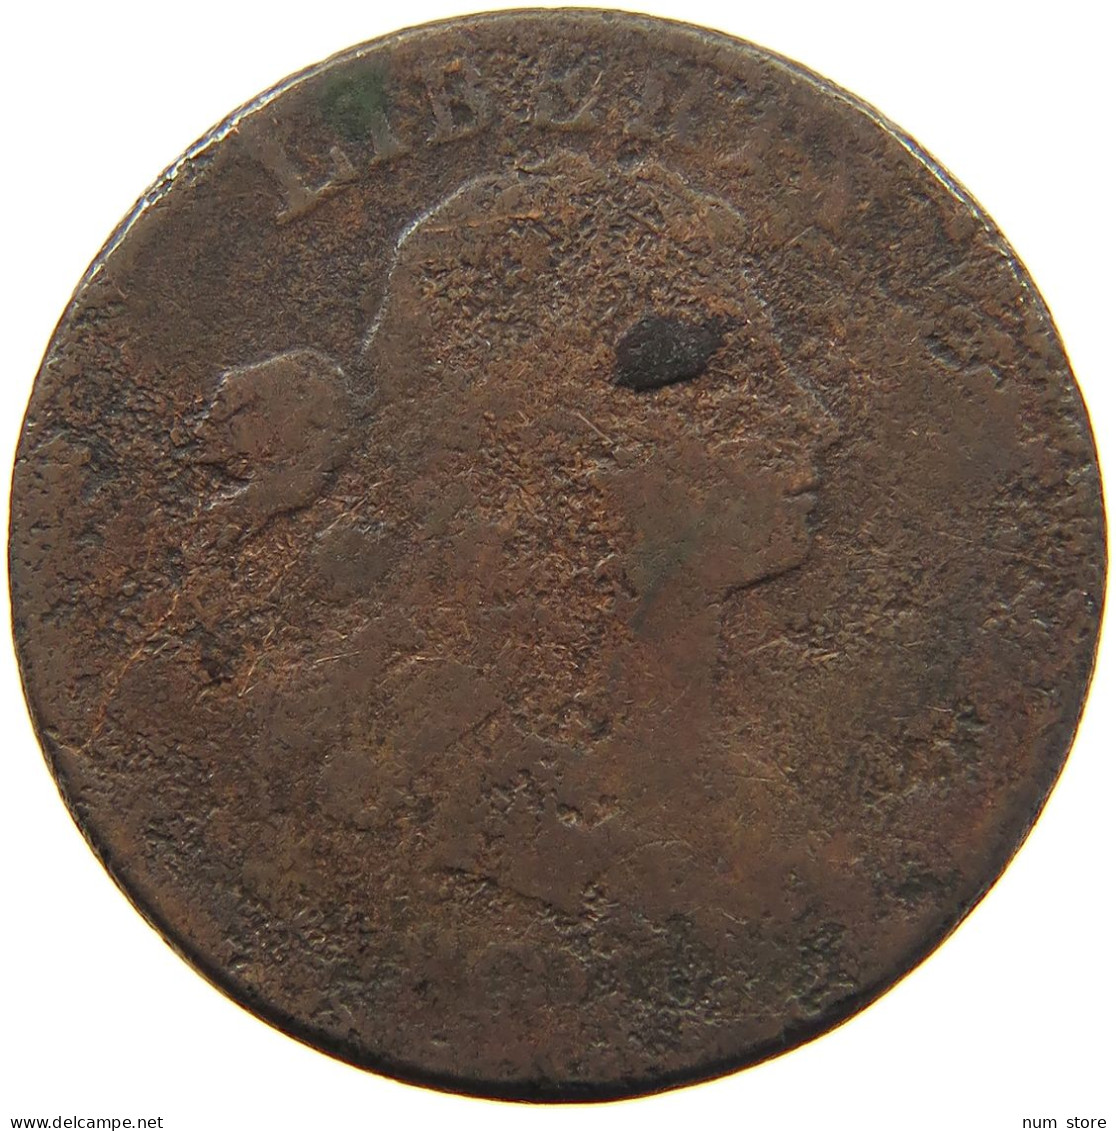 UNITED STATES OF AMERICA LARGE CENT 1802 Draped Bust #c003 0375 - 1796-1807: Draped Bust